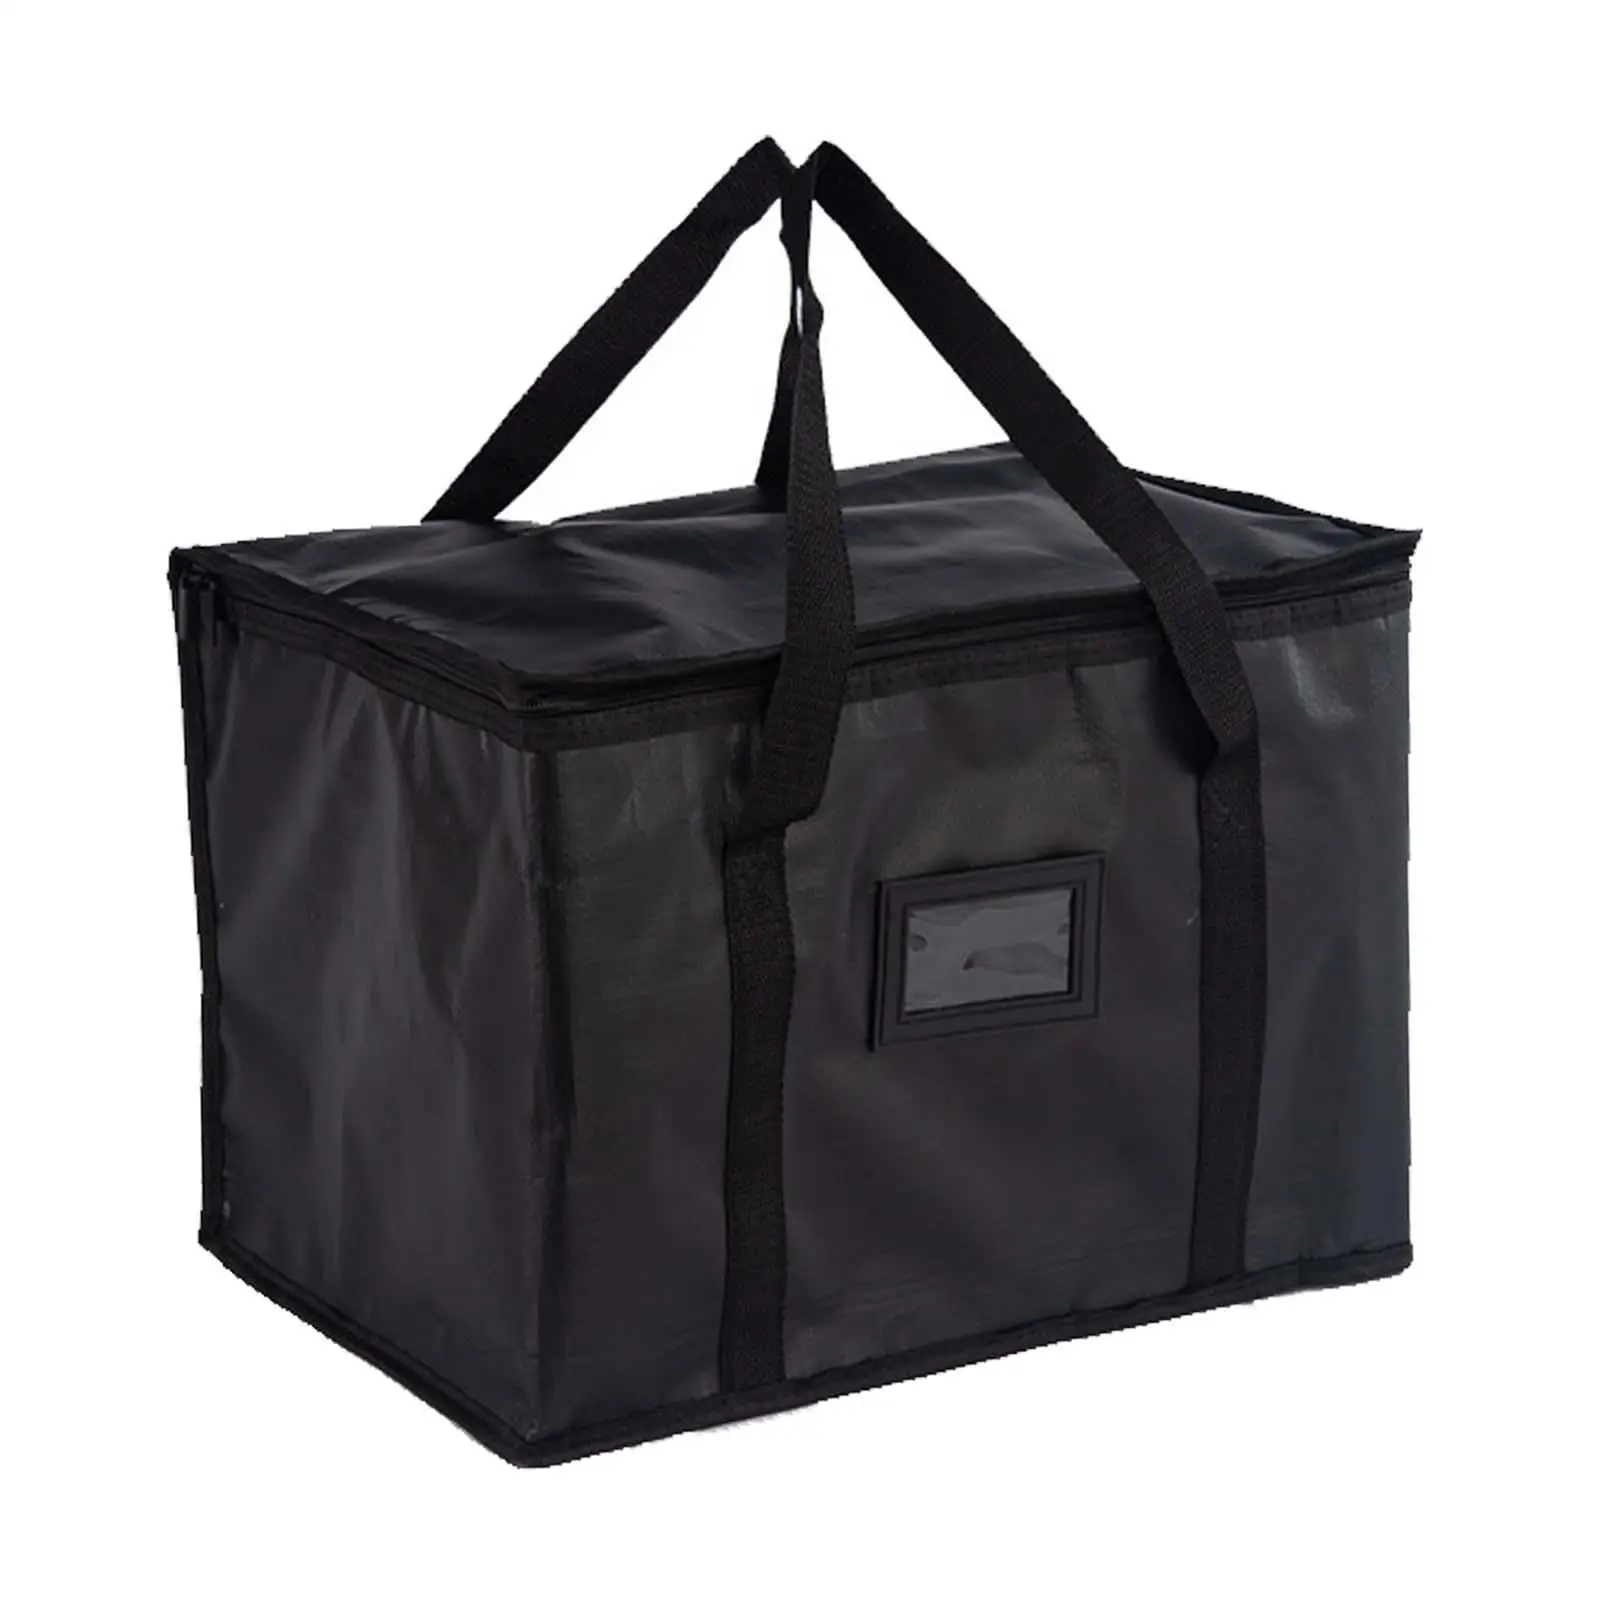 Large Insulated Cooler Bag Folding Professional Catering Transportation Thickened Food Delivery Bag for Travel Outdoor Catering